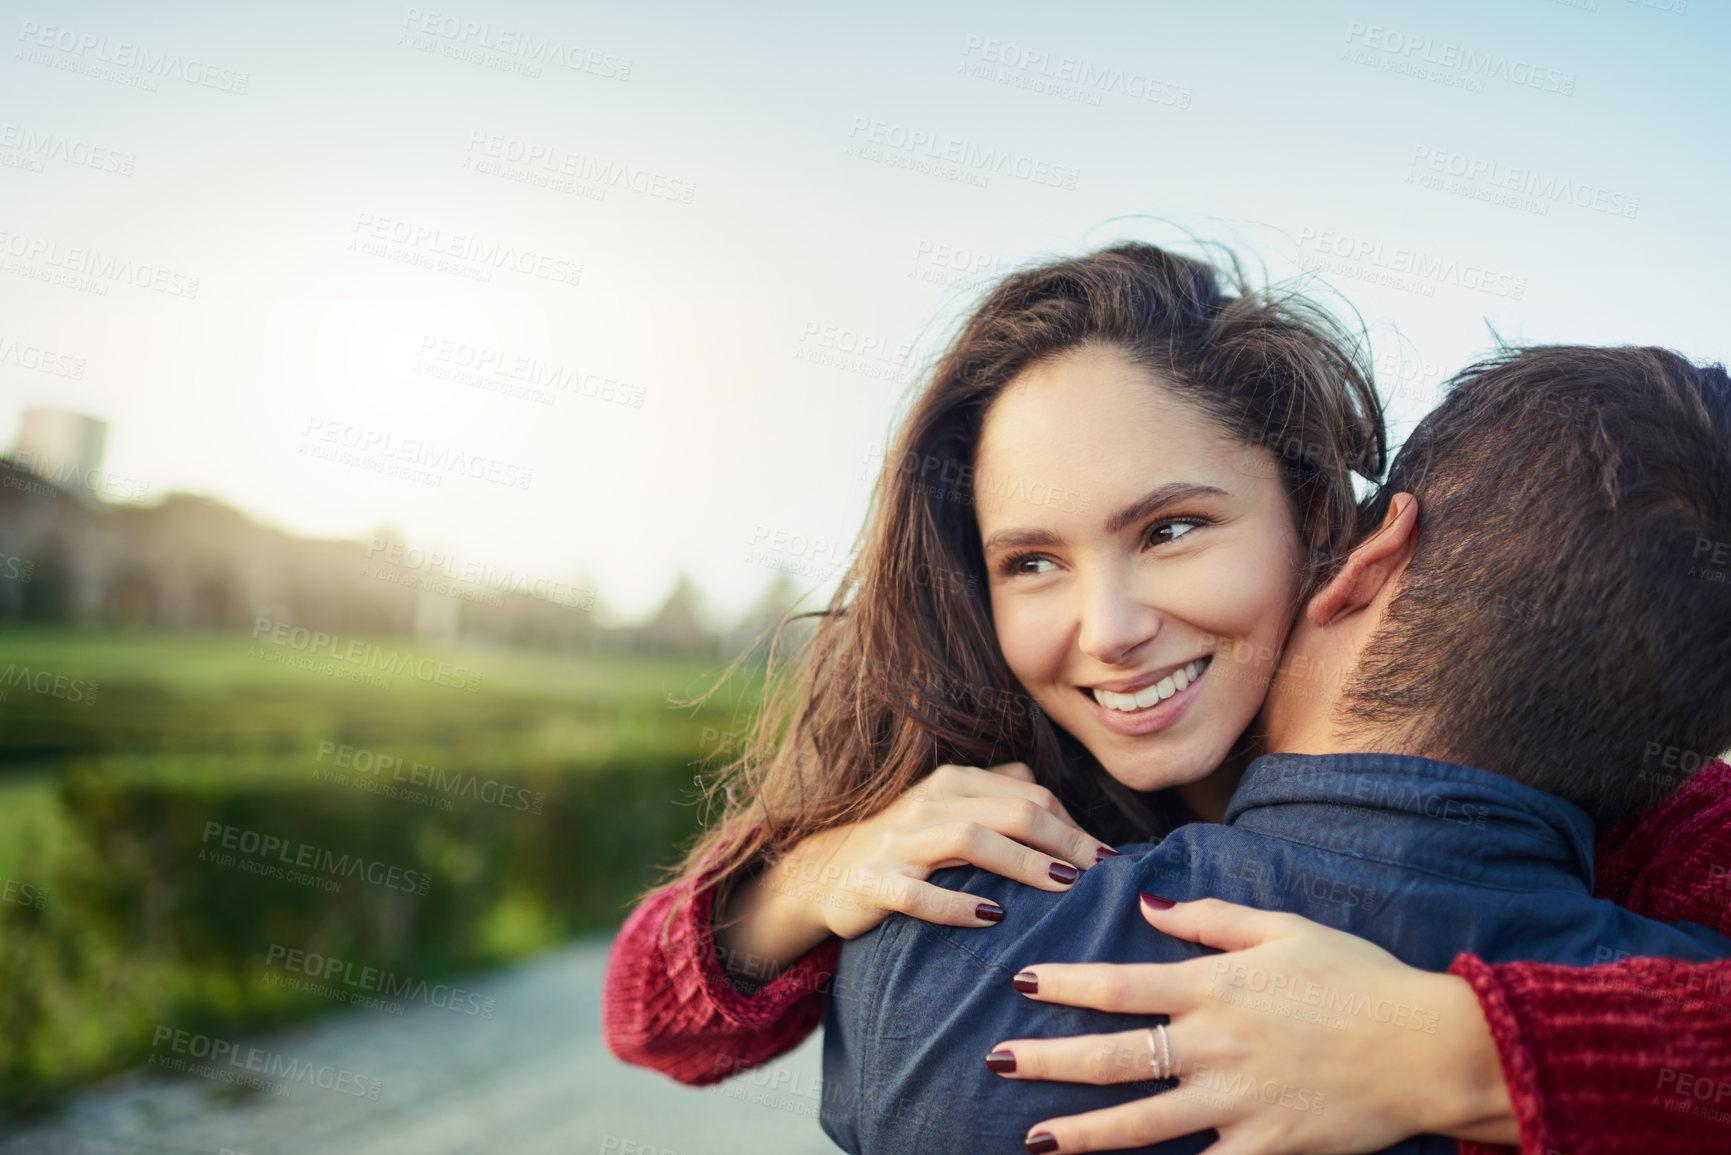 Buy stock photo Shot of a happy young couple embracing each other outdoors